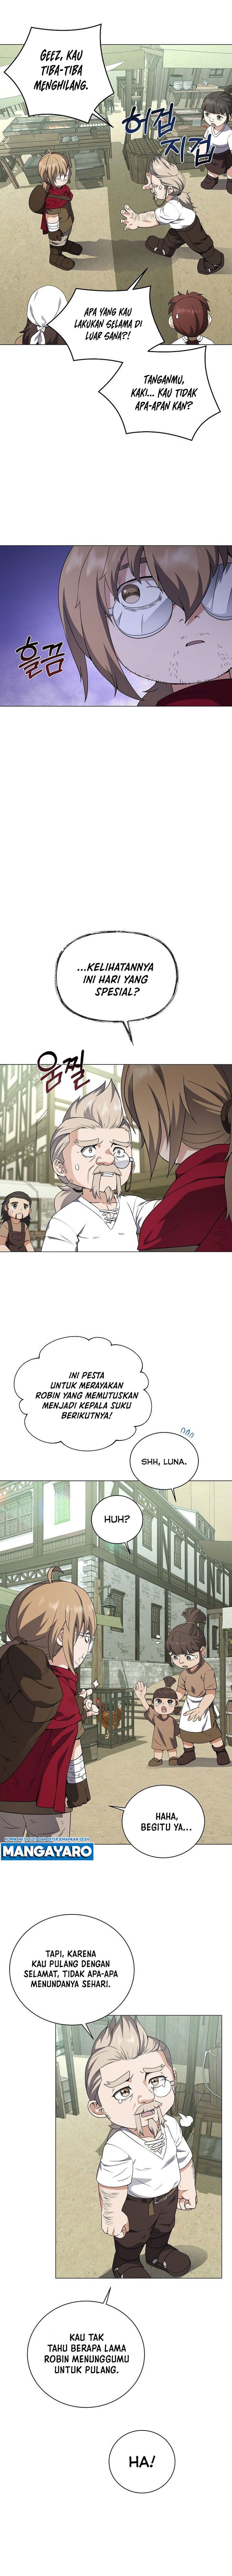 The Returning Warrior’s Alley Restaurant Chapter 61 Bahasa Indonesia